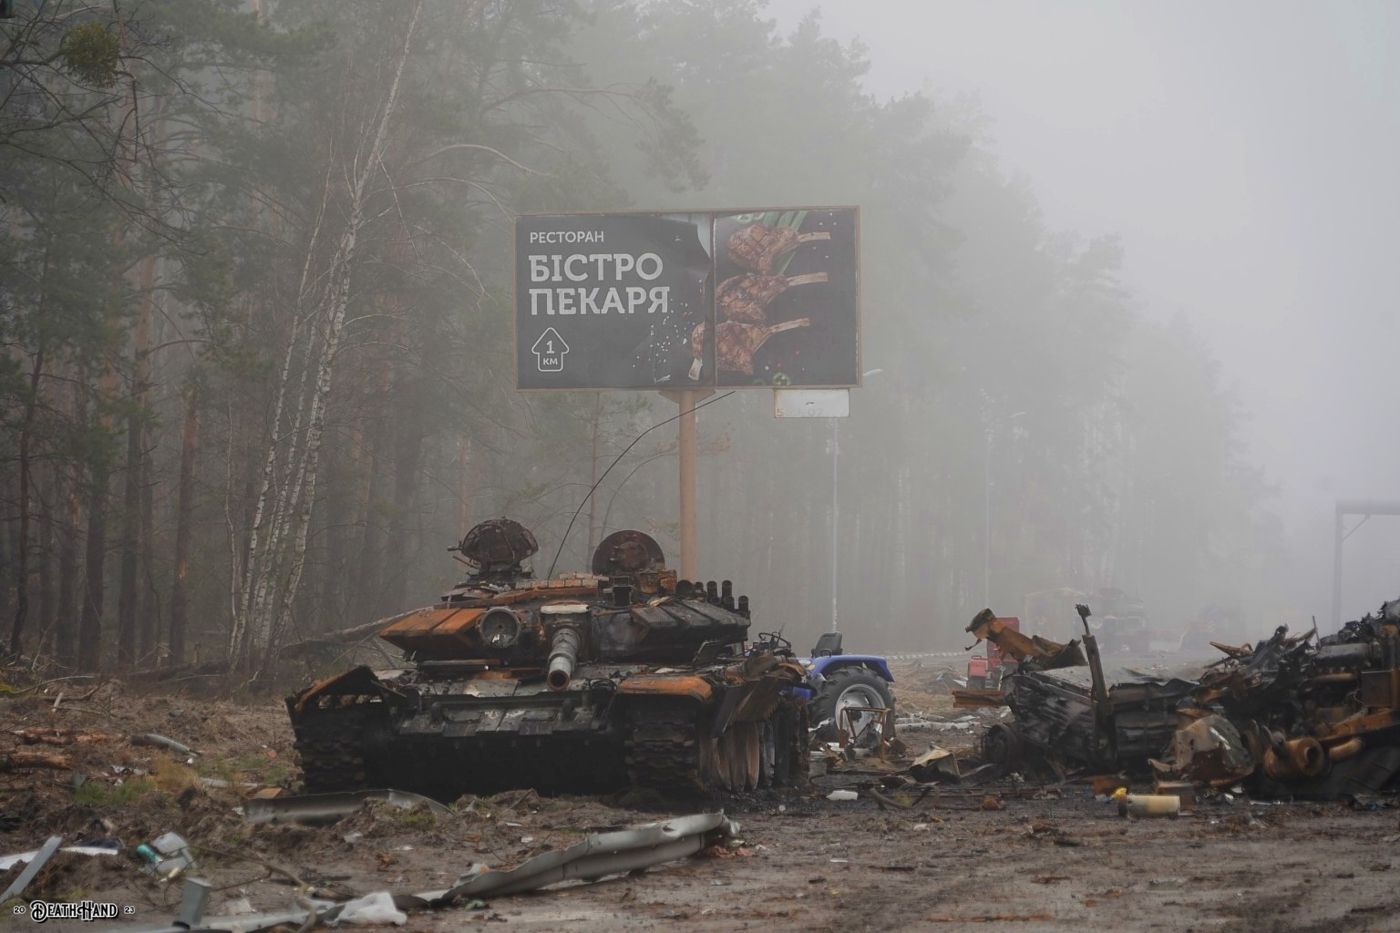 DH - M06 highway carnage beetween towns of Mriia and Myla - Ukraine 35 - early April 2022.jpg